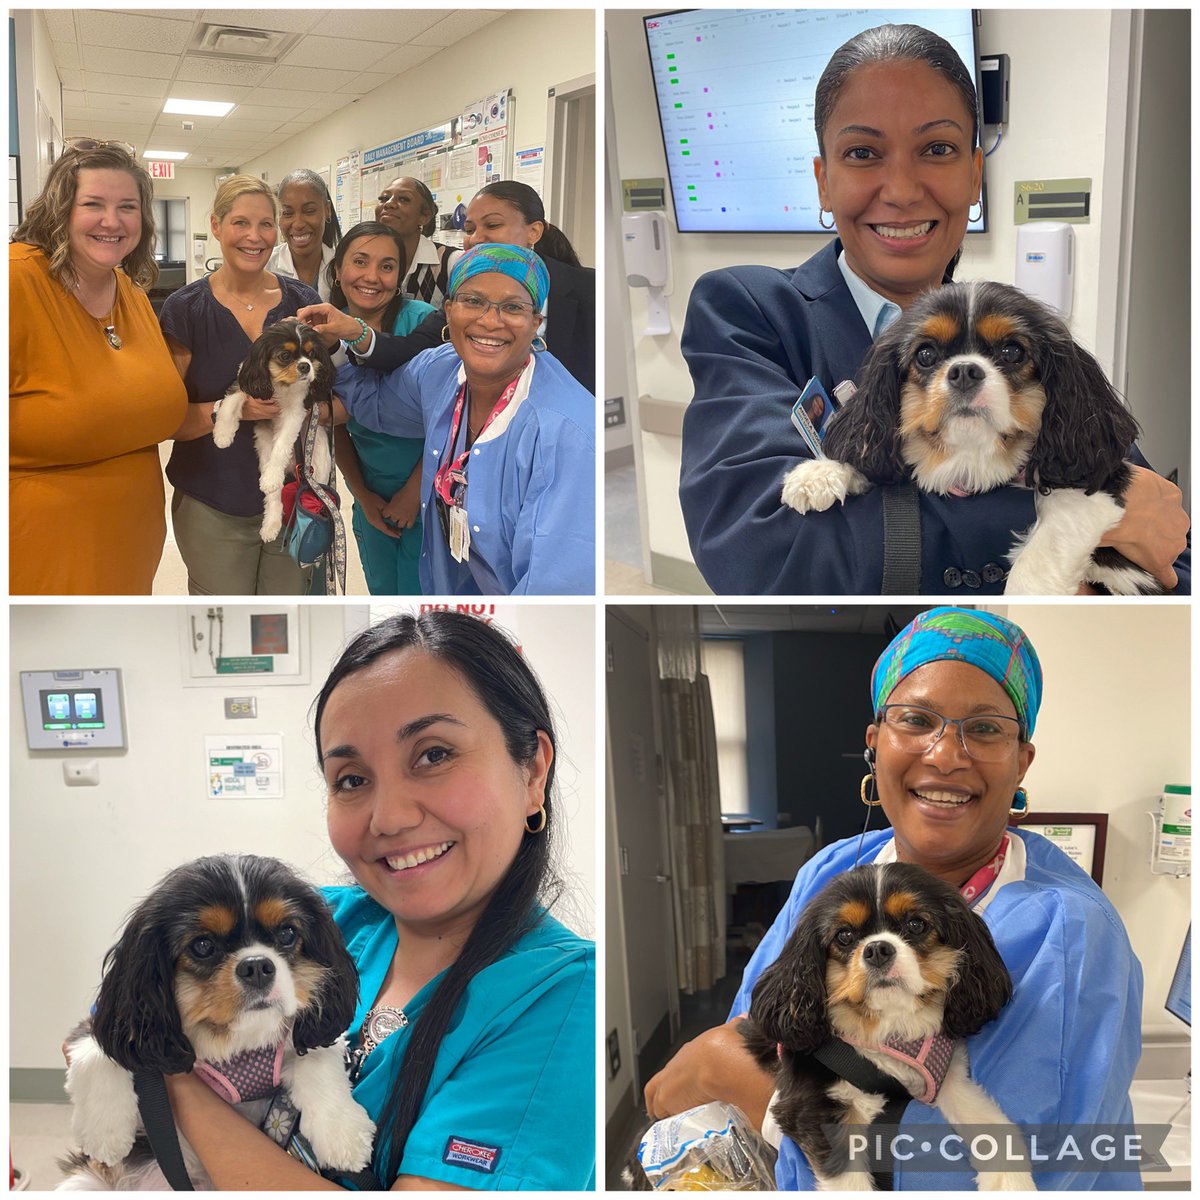 'Bringing smiles and comfort to @MSMStuy6Rehab with the paws-itively amazing power of pet therapy! 🐾🏥 Our furry friends are here to brighten the day for patients and staff alike. #PetTherapy #HealingPaws #HospitalComfort @MSMorningside @mcrsinanan @amylucie @MichelleDunnRN